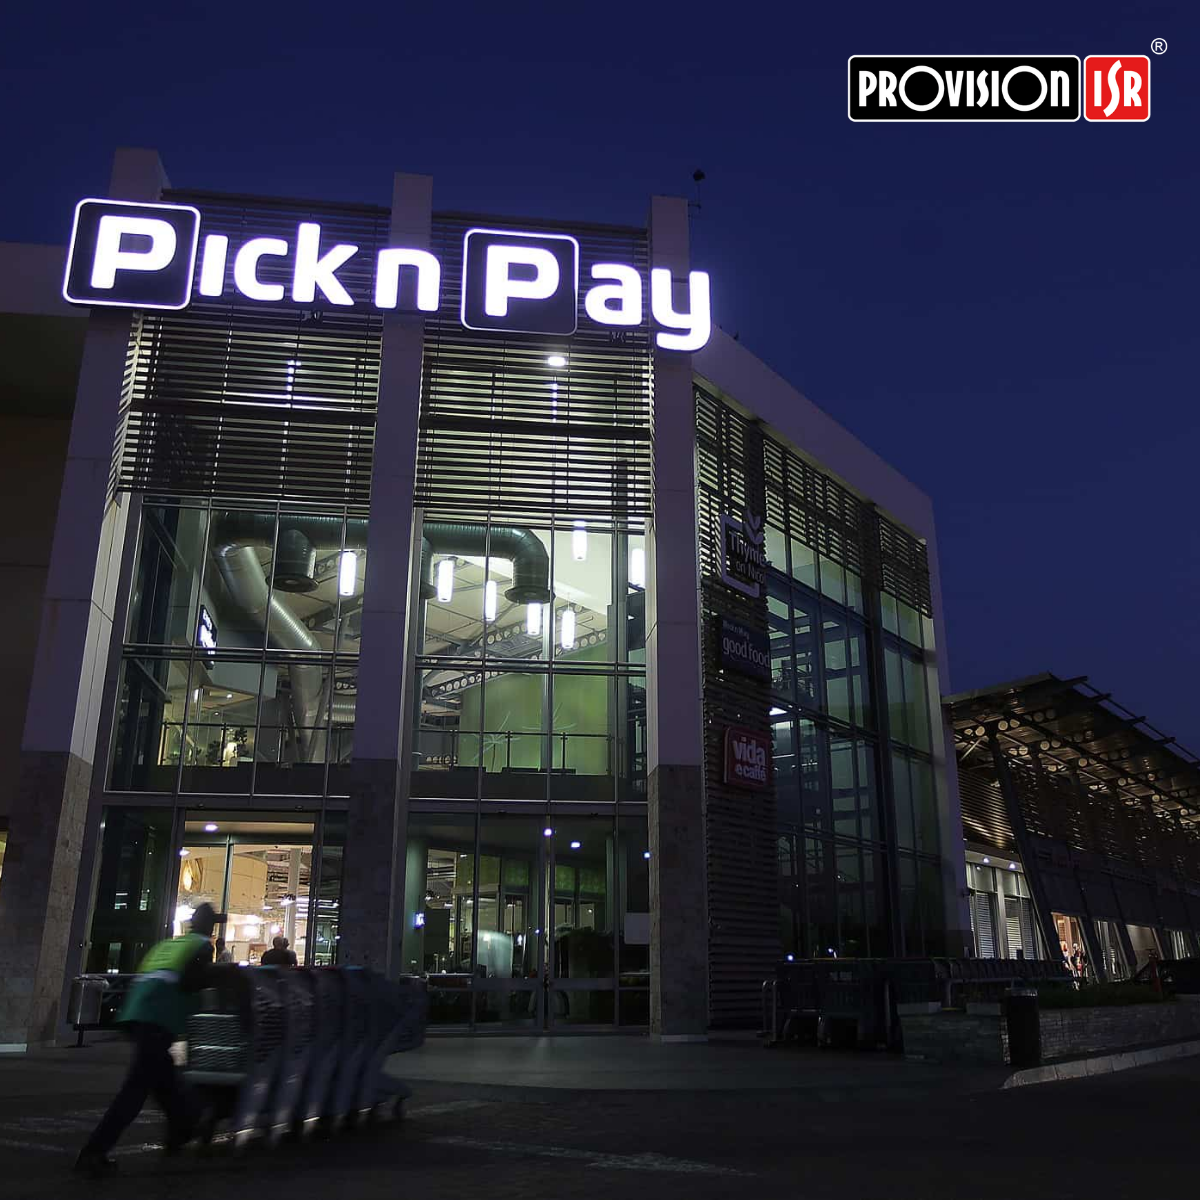 Pick n Pay - South Africa